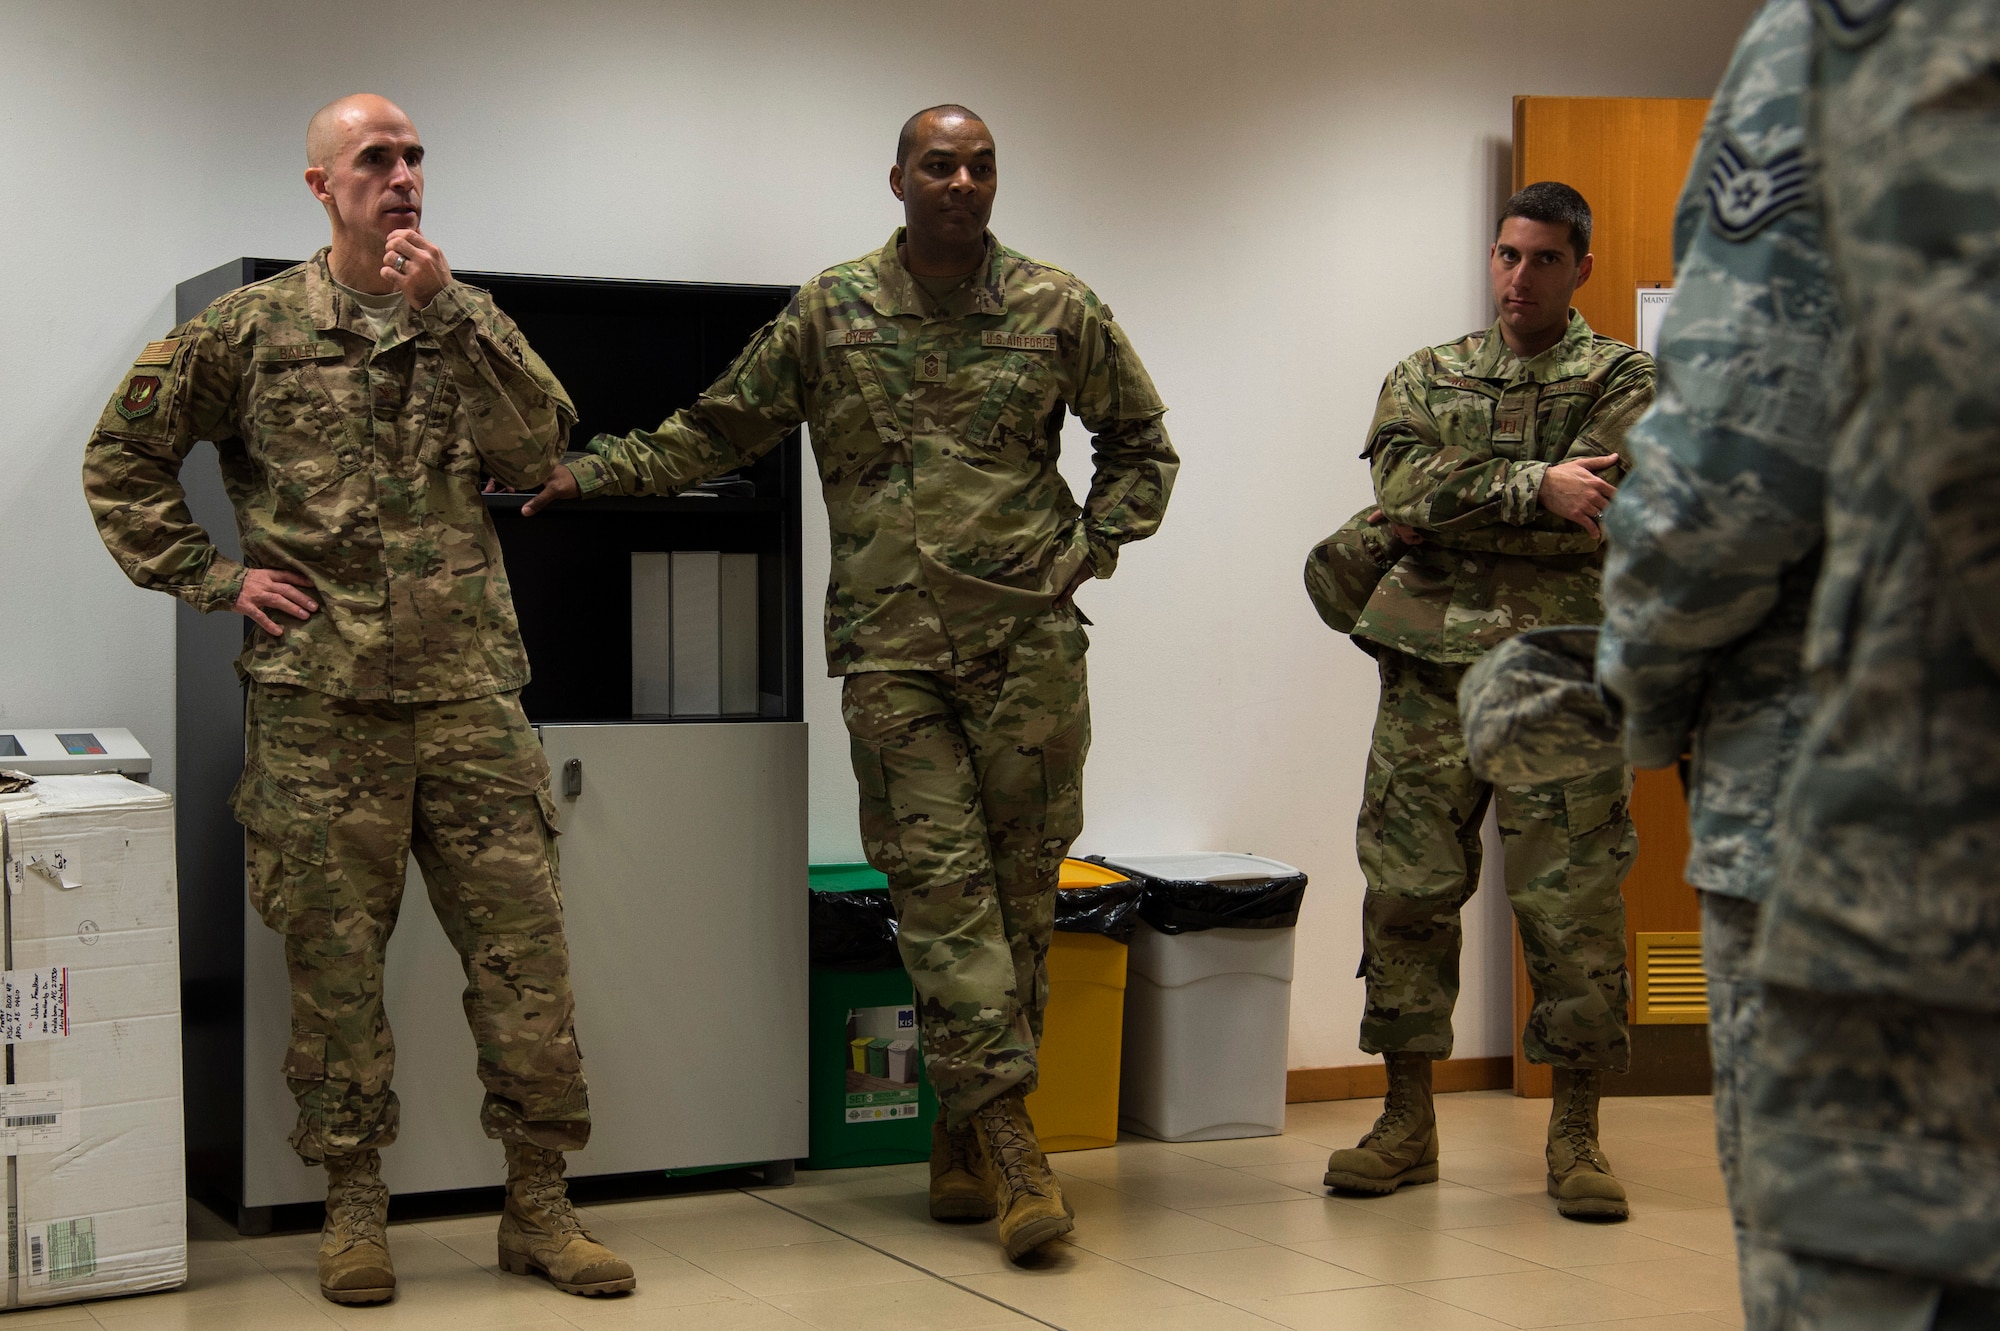 U.S. Air Force Col. Jason Bailey, 52nd Fighter Wing commander, left, and Chief Master Sgt. Alvin Dyer, 52nd FW command chief, center, speak with 704th Munitions Support Squadron maintenance Airmen at Ghedi Air Base, Italy, Nov. 15, 2018. The 704th MUNSS, a 52nd FW geographically separated unit, provides support to the Italian air force, 6th Stormo, supporting surety and deterrence to NATO allies. 52nd FW leadership visited the GSU to recognize and connect with Airmen. (U.S. Air Force photo by Airman 1st Class Valerie Seelye)